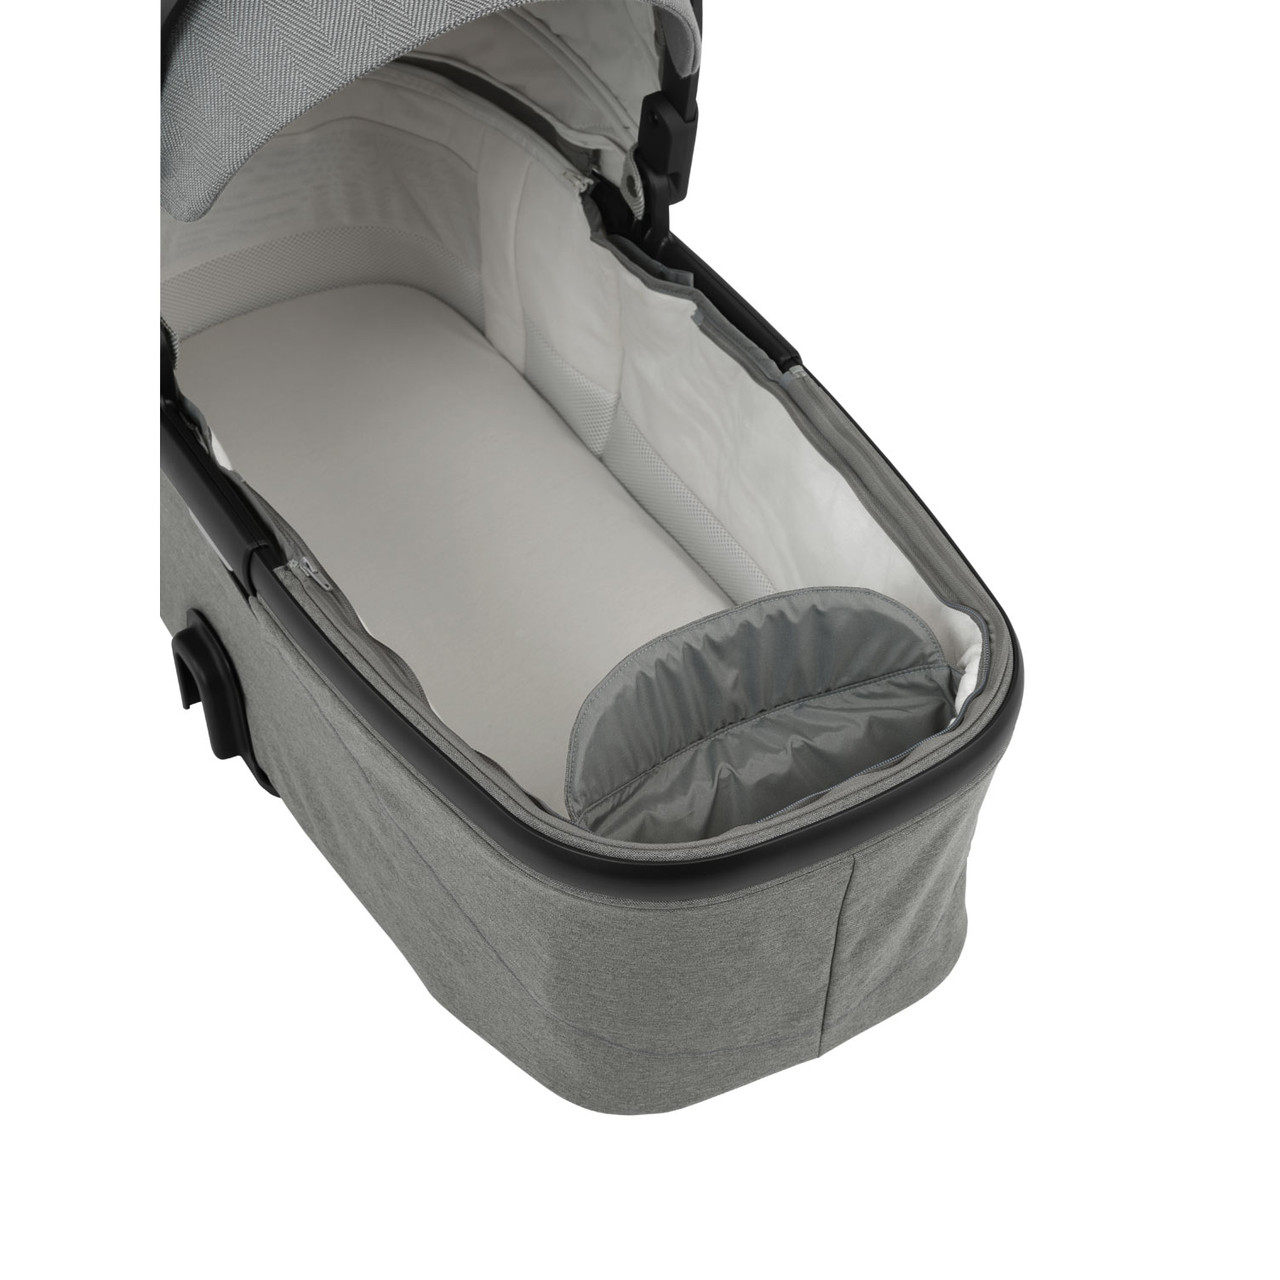 Nuna Demi Grow Bassinet: Features and Benefits Unveiled